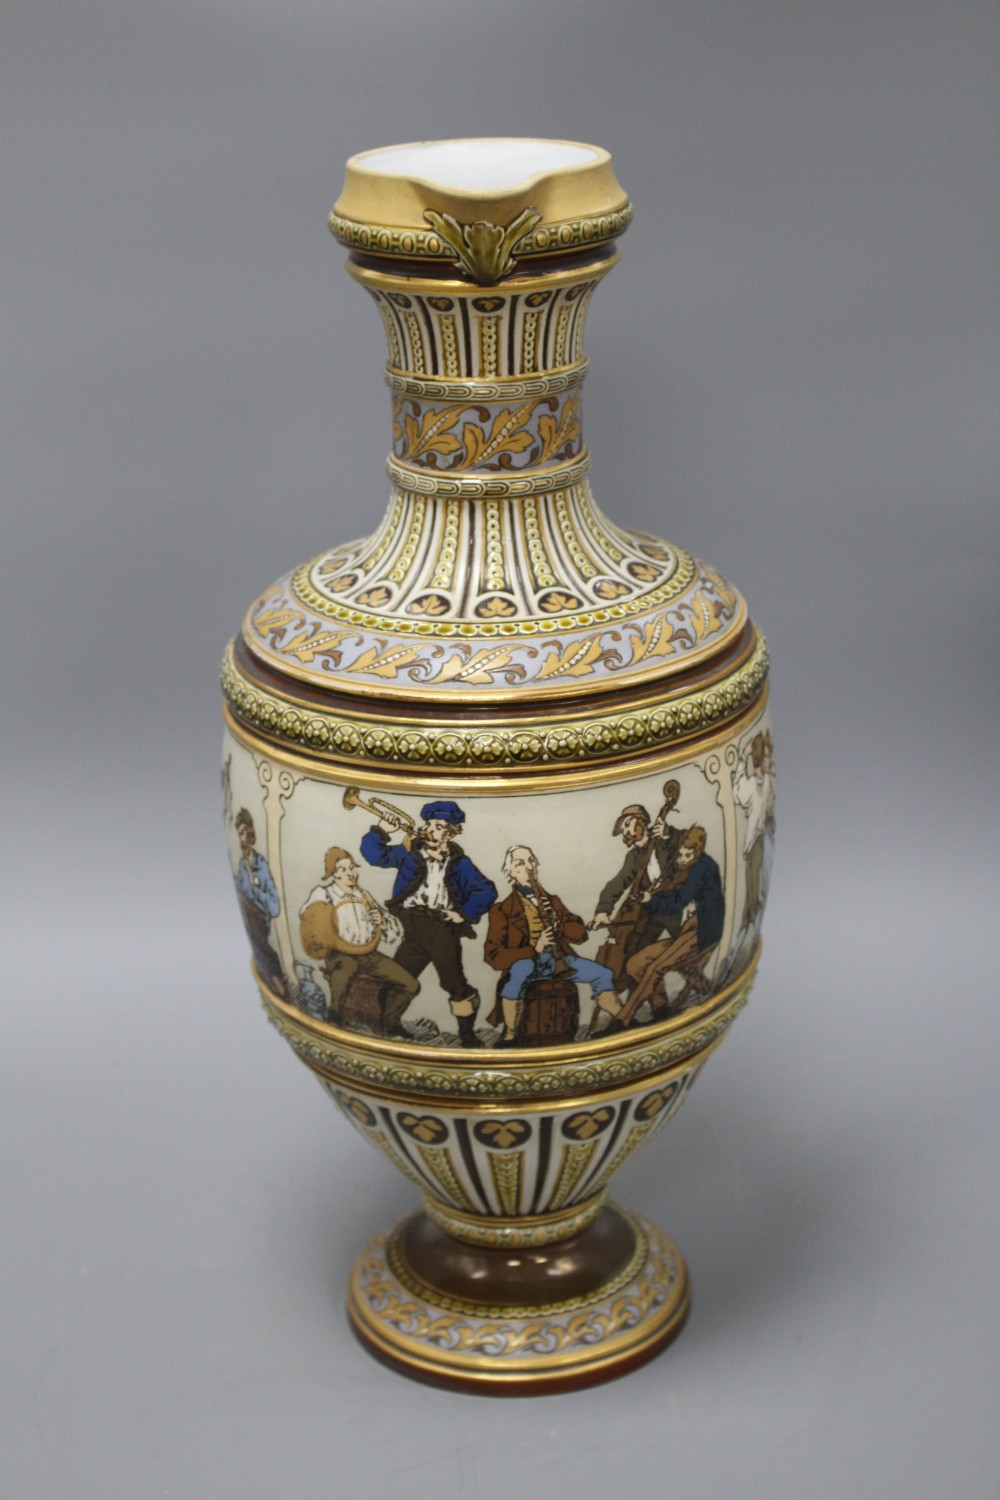 A large Villeroy and Boch Mettlach ewer, decorated with figures drinking, dancing and musicians, impressed 1159, height 45cm